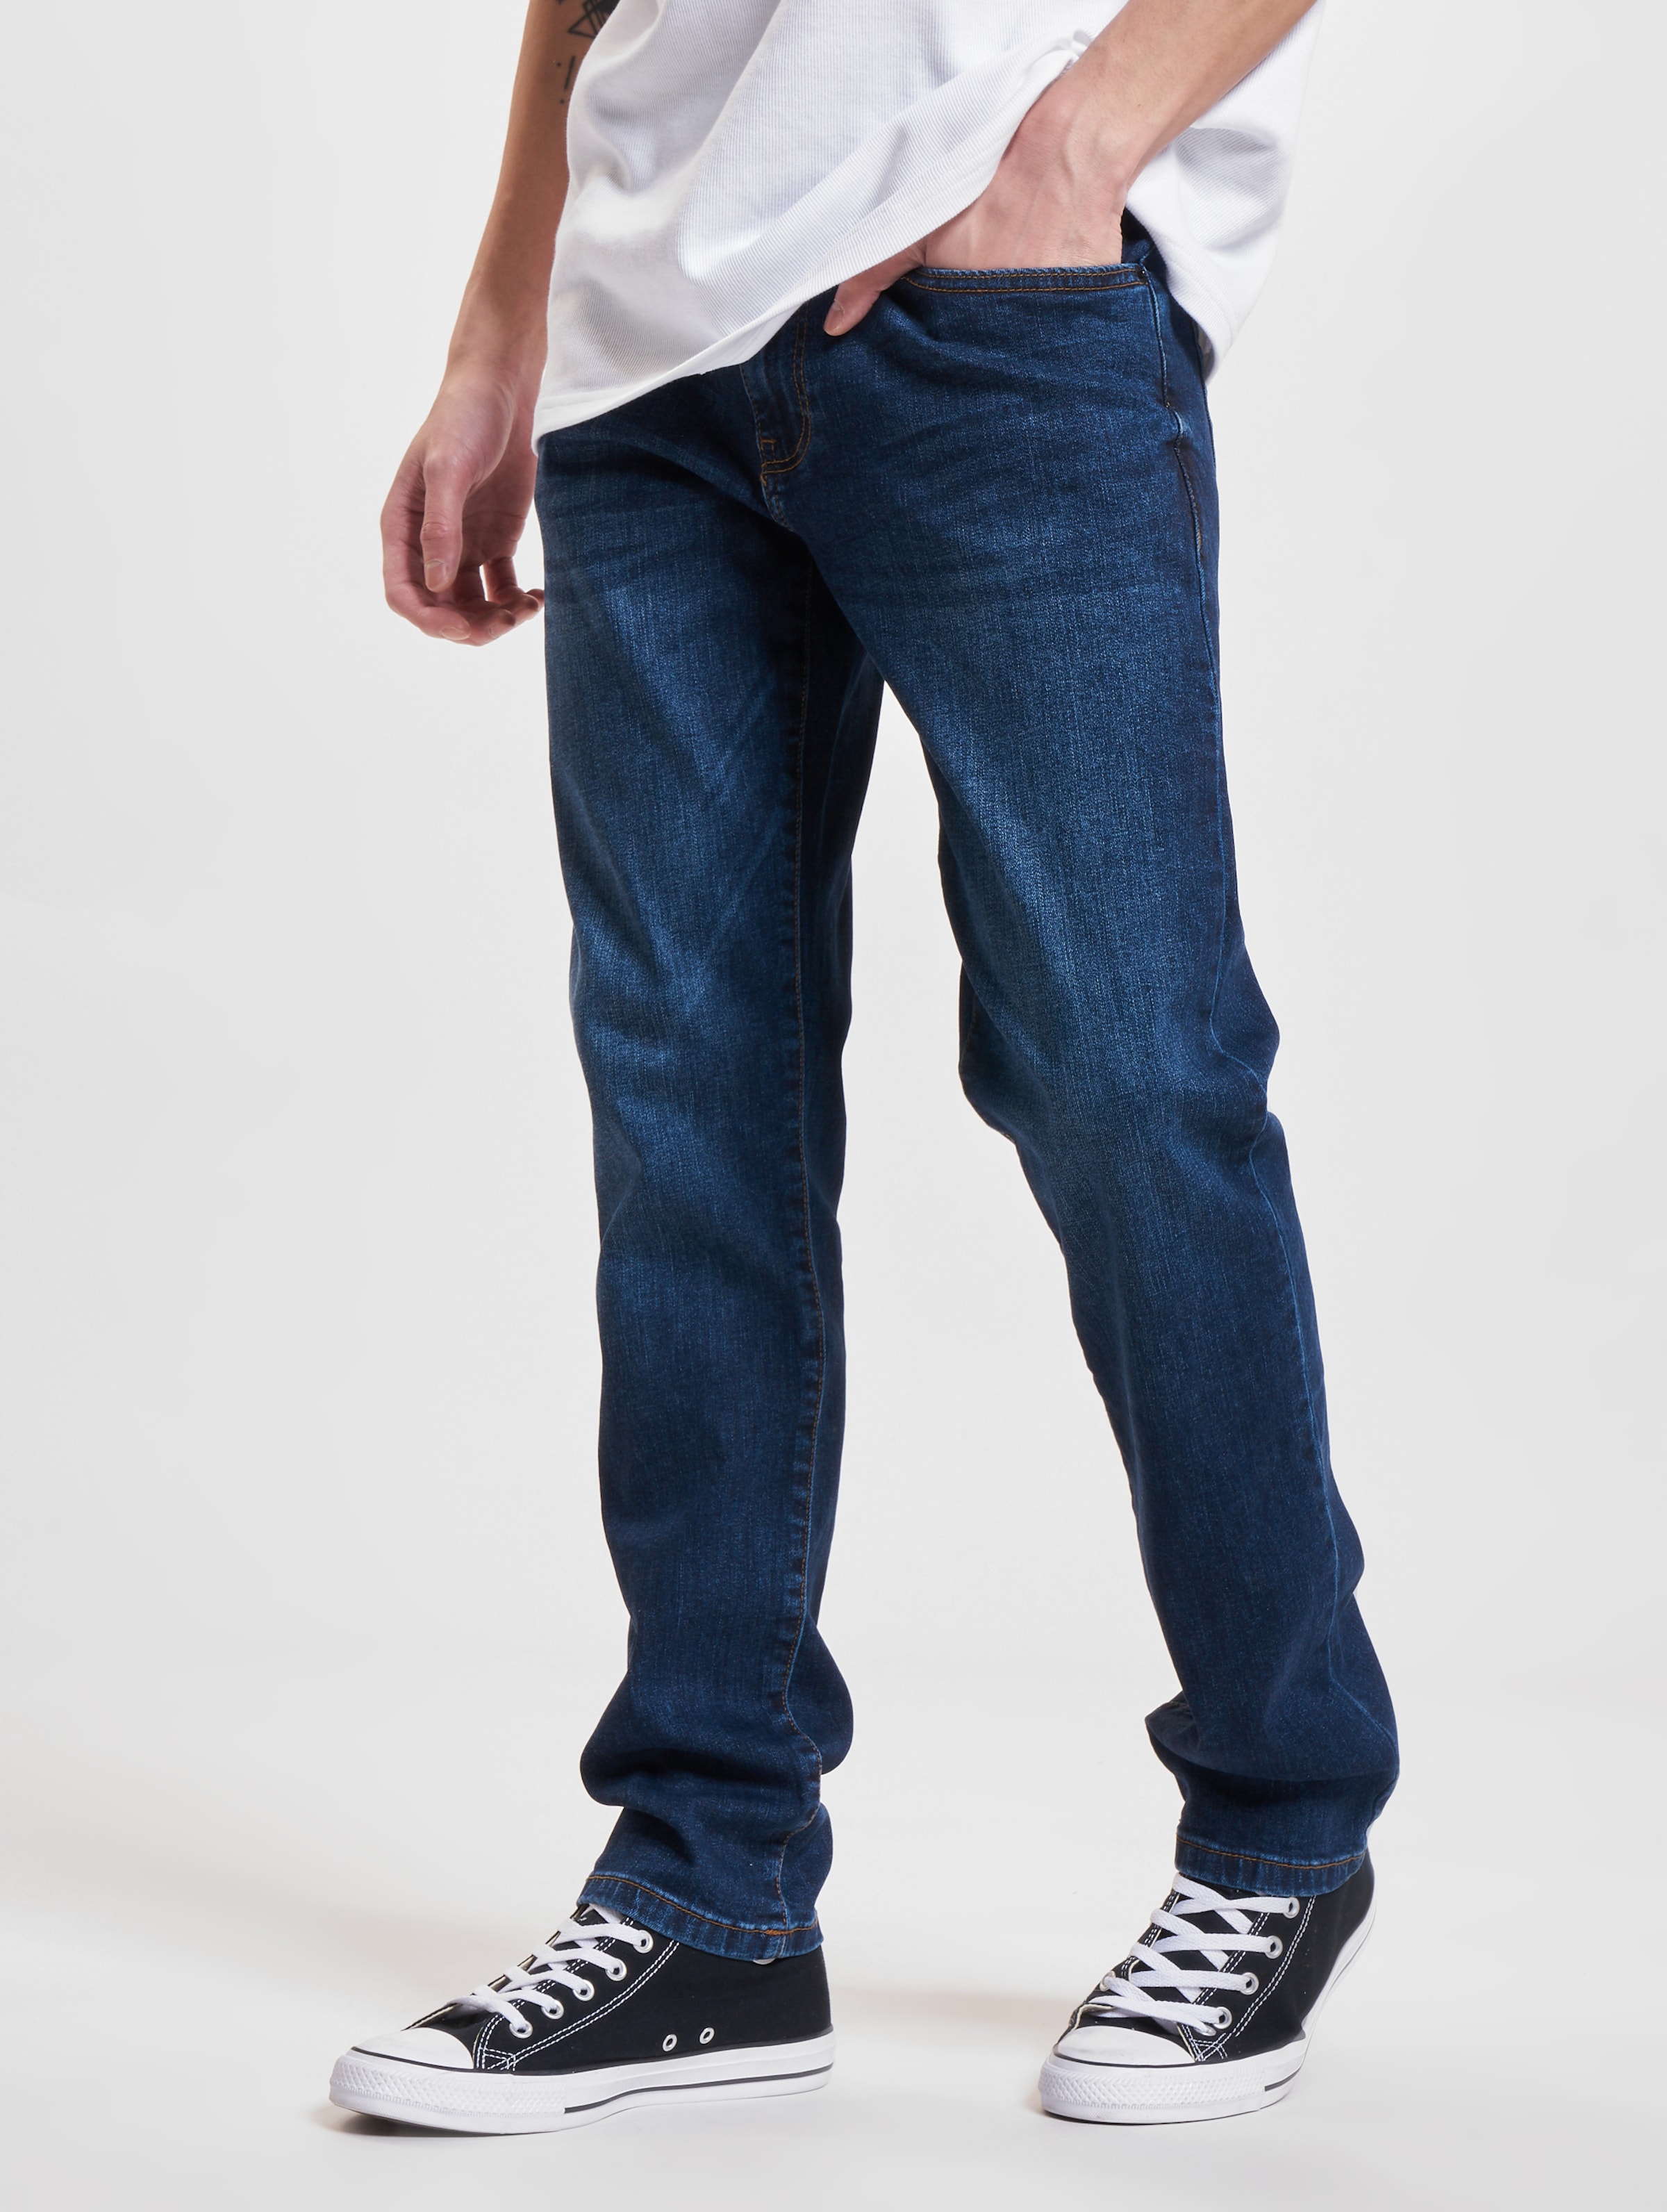 ONLY & SONS ONSWEFT REG.DK. BLUE 6752 DNM JEANS NOOS Heren Jeans - Maat W29 X L34